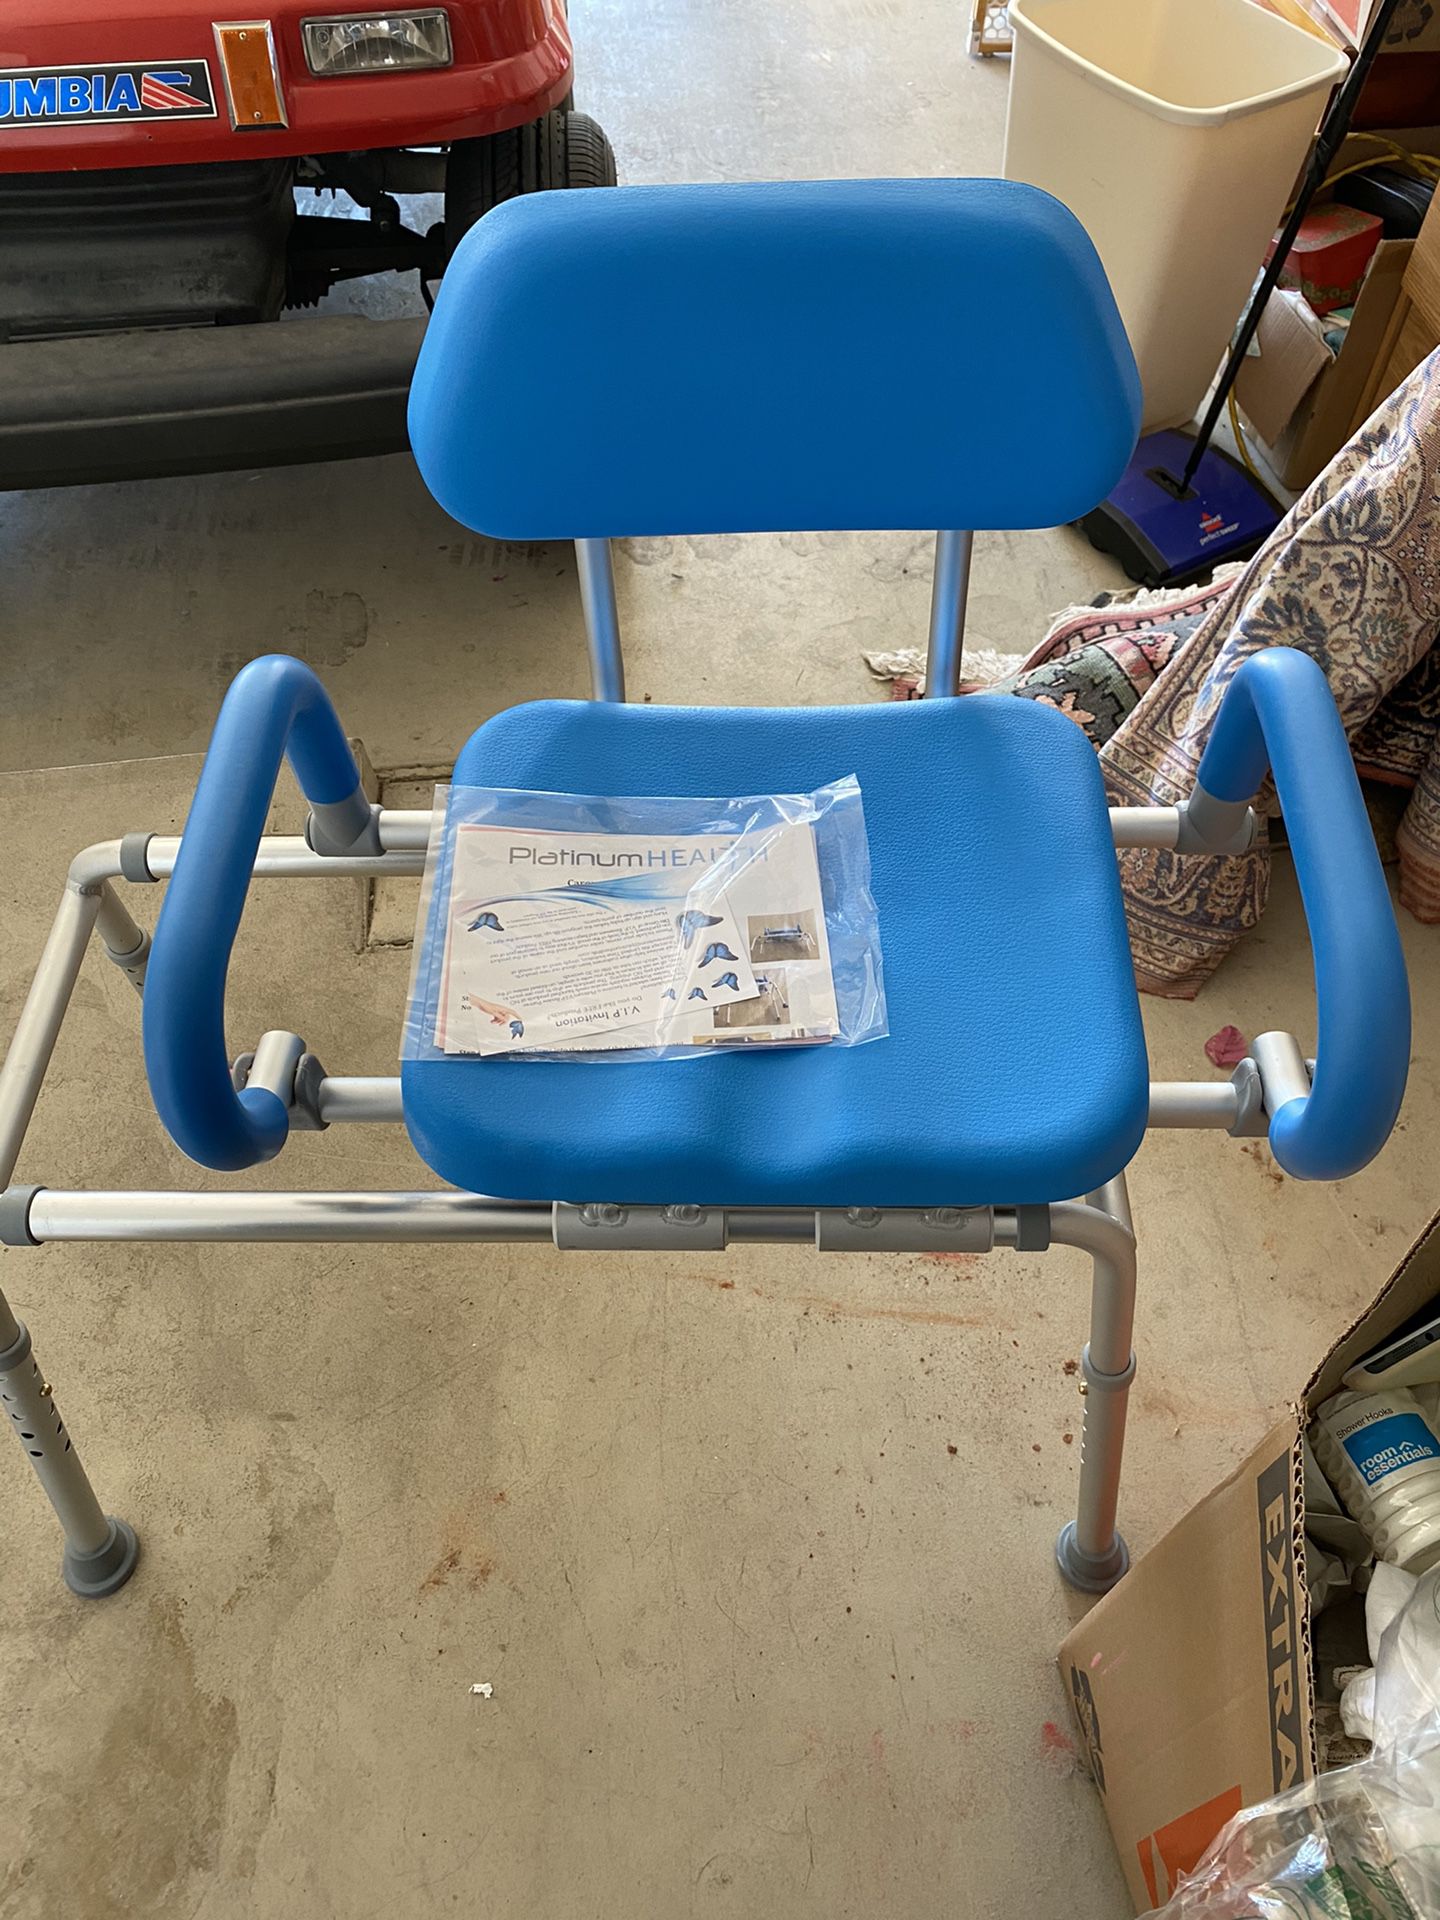 Shower chair: adjustable legs so half can be in tub and half on floor sliding and swivel seat. Never used $80